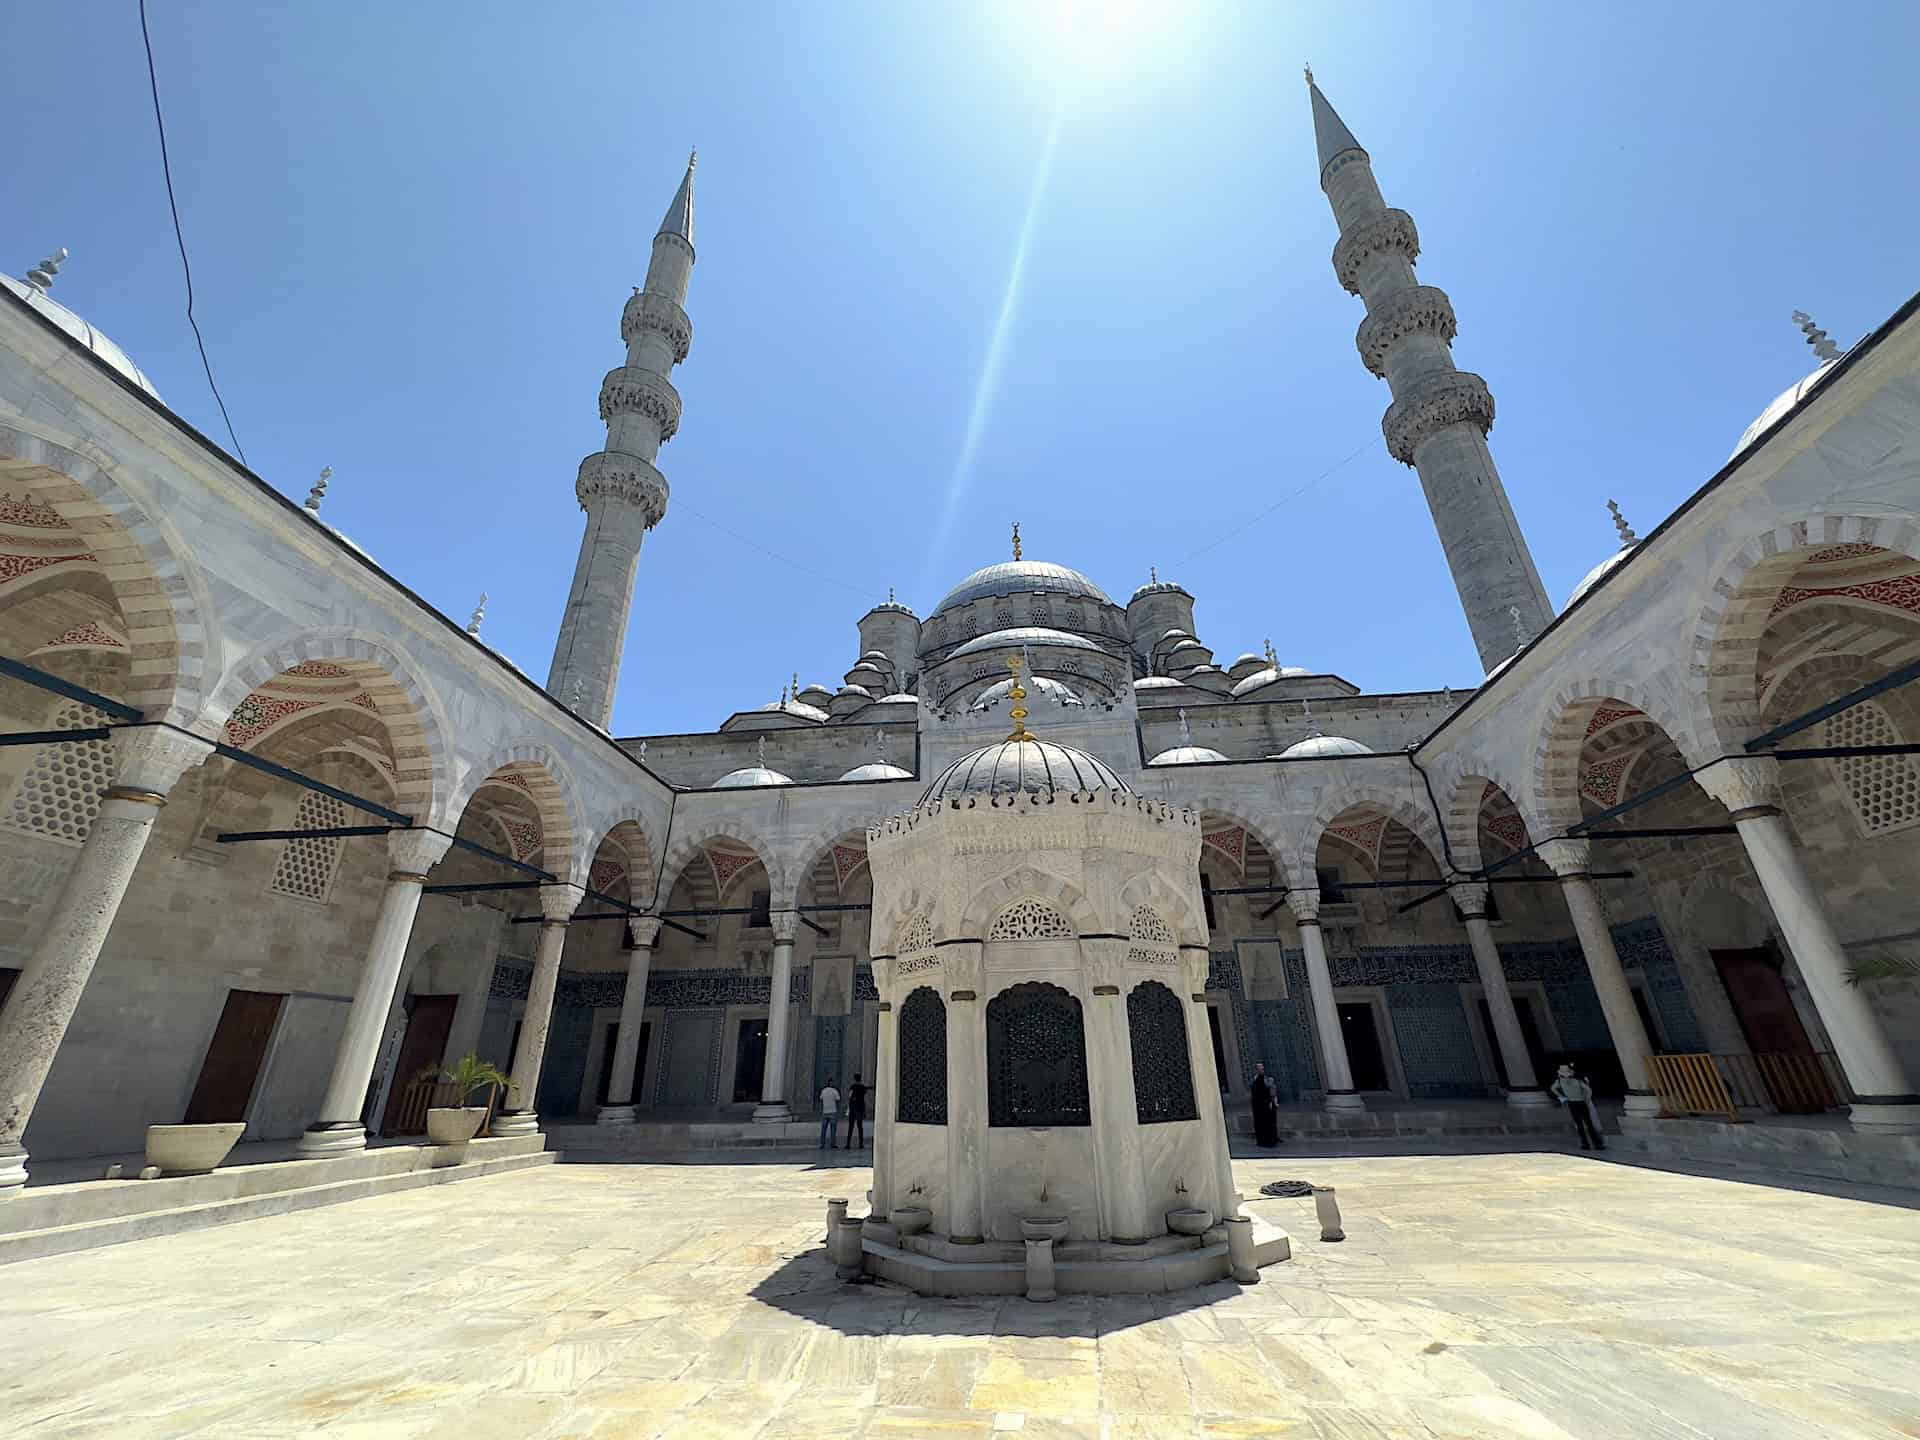 Courtyard of the New Mosque in Istanbul, Turkey